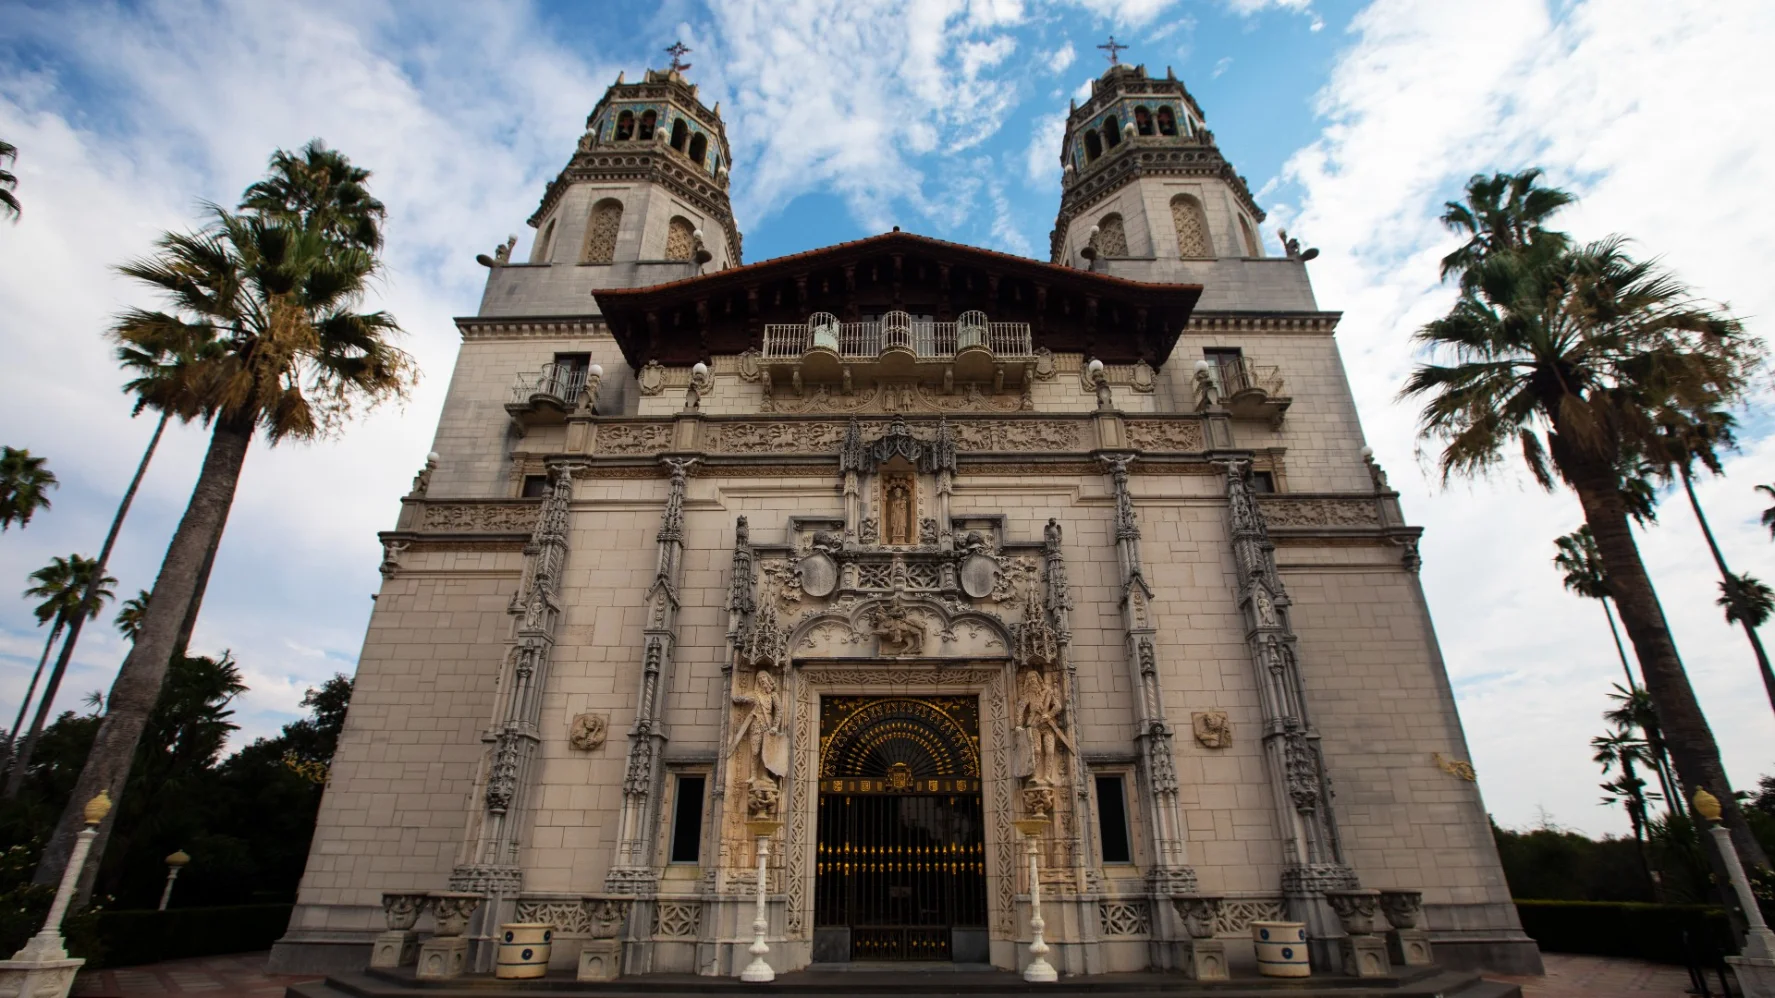 California’s Hearst Castle to Reopen After Pandemic, Damage